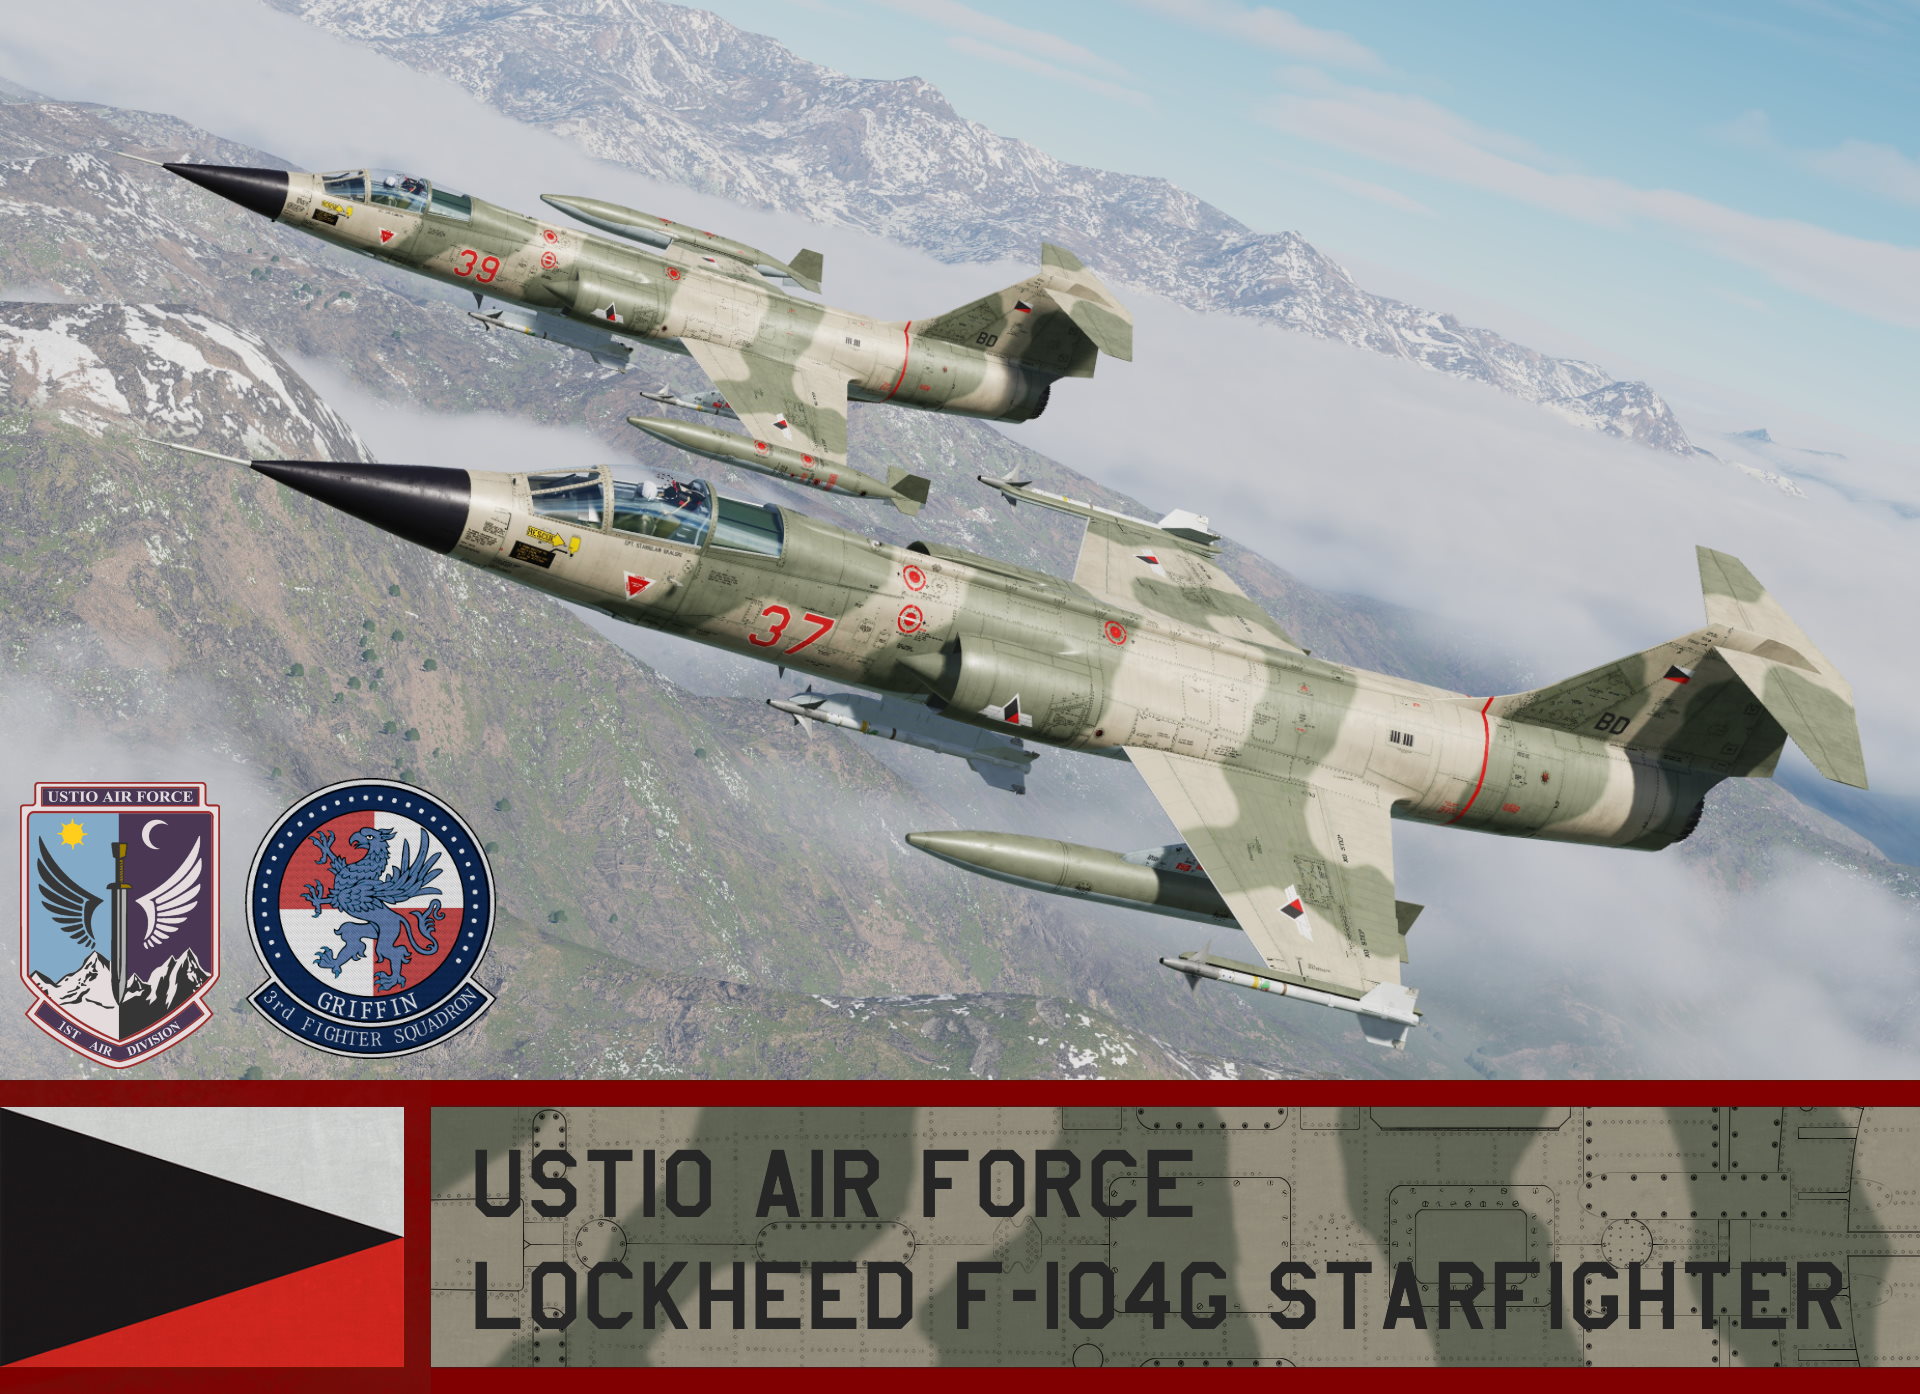 Ustio Air Force F-104G Starfighter - Ace Combat ( 1st Air Division, 3rd Fighter Squadron)